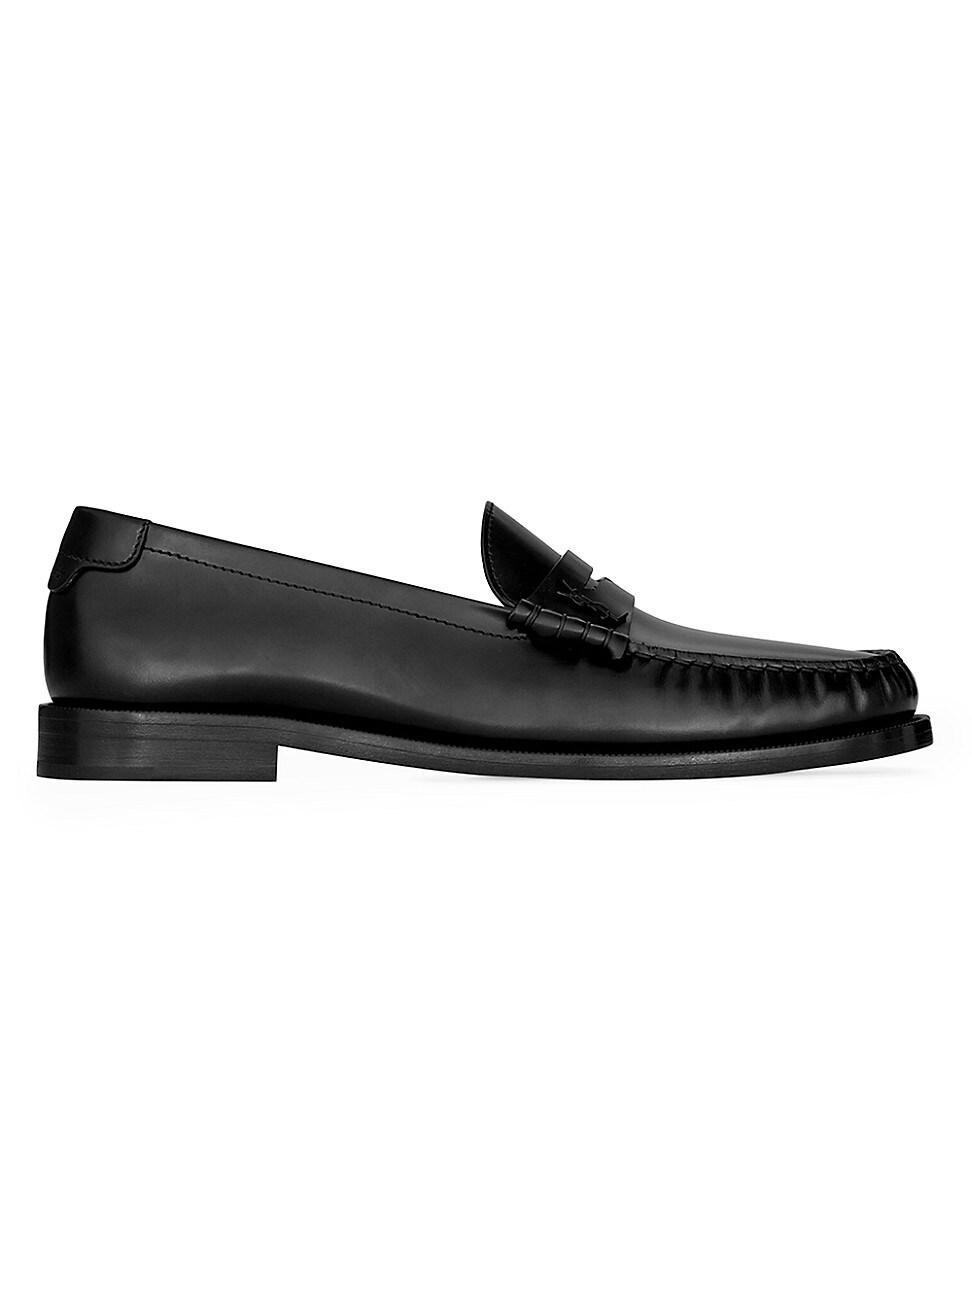 Mens Boit Suede Loafers Product Image